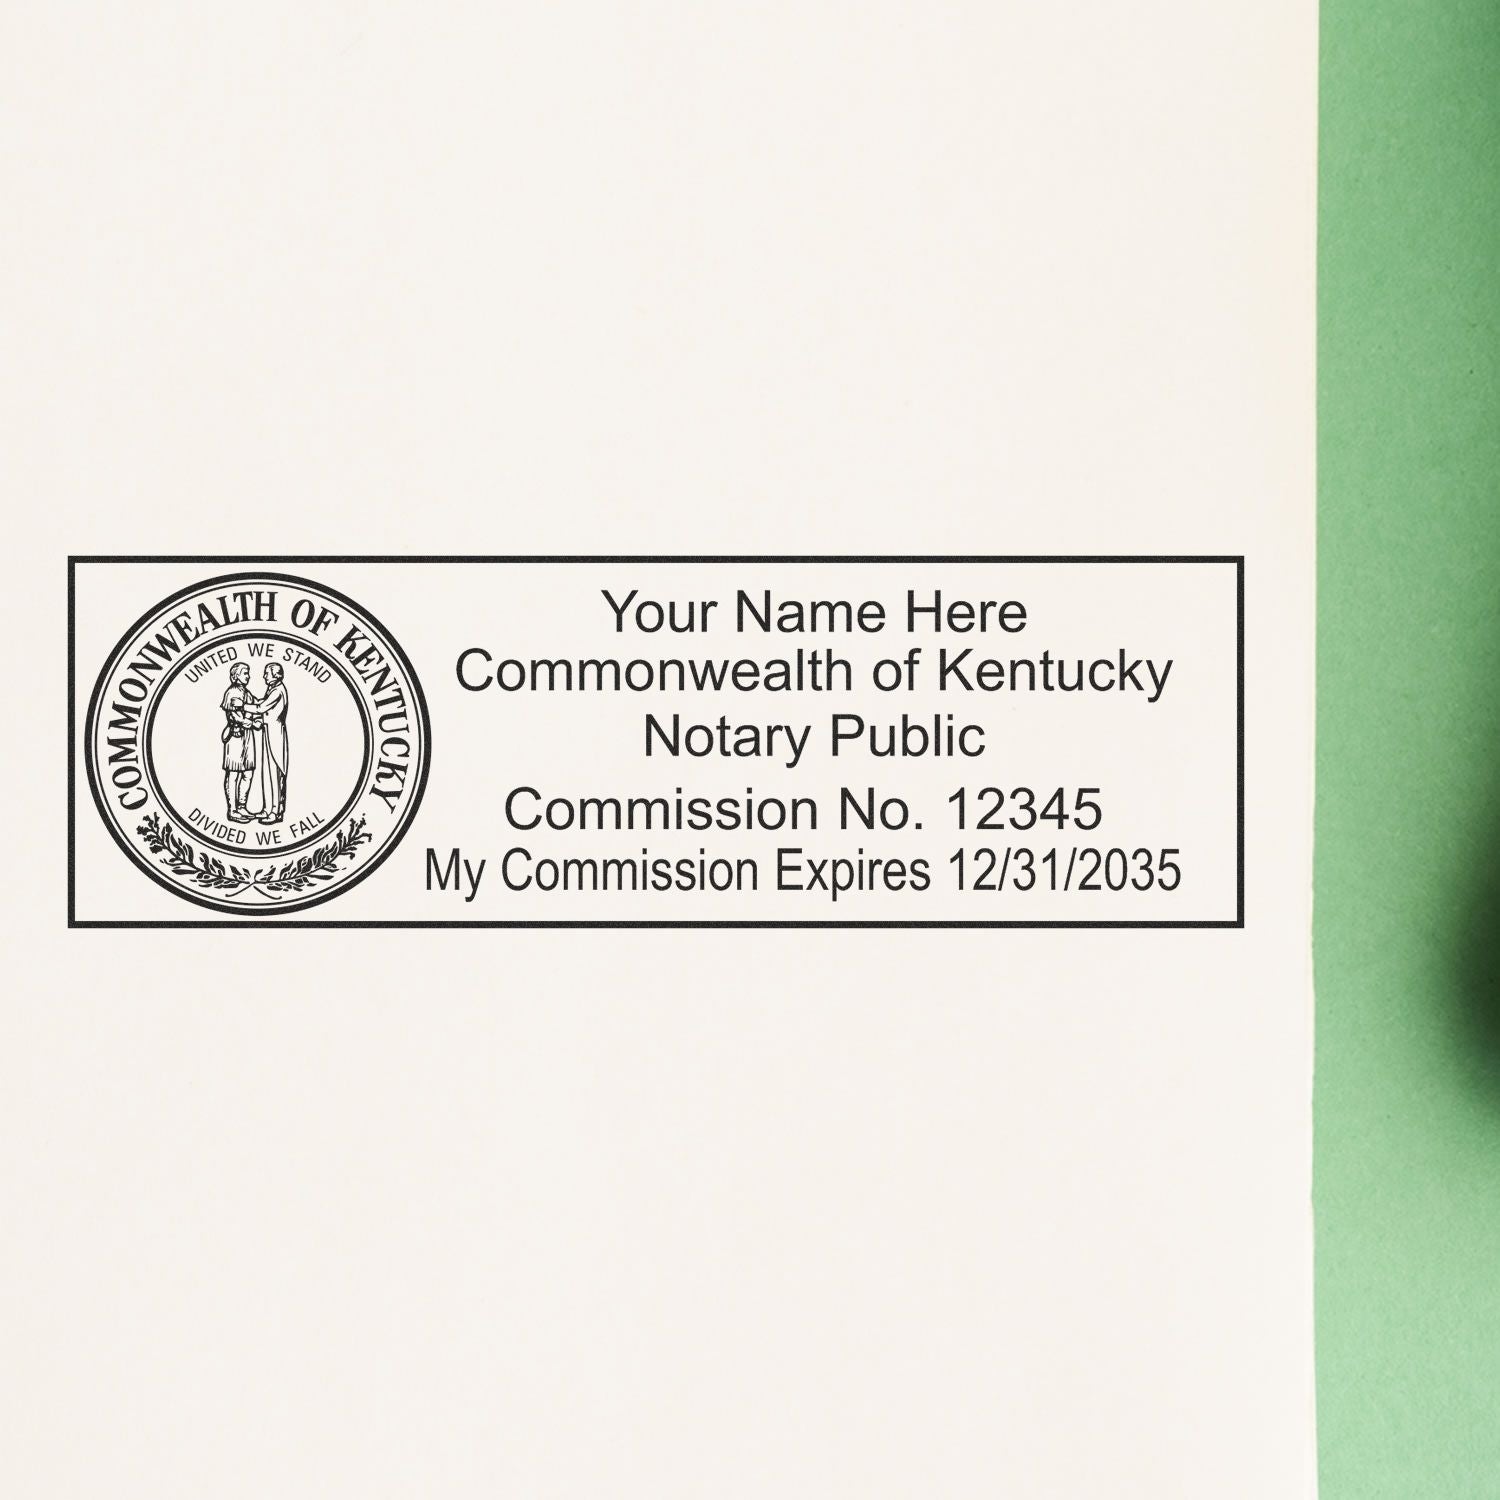 The main image for the Wooden Handle Kentucky State Seal Notary Public Stamp depicting a sample of the imprint and electronic files